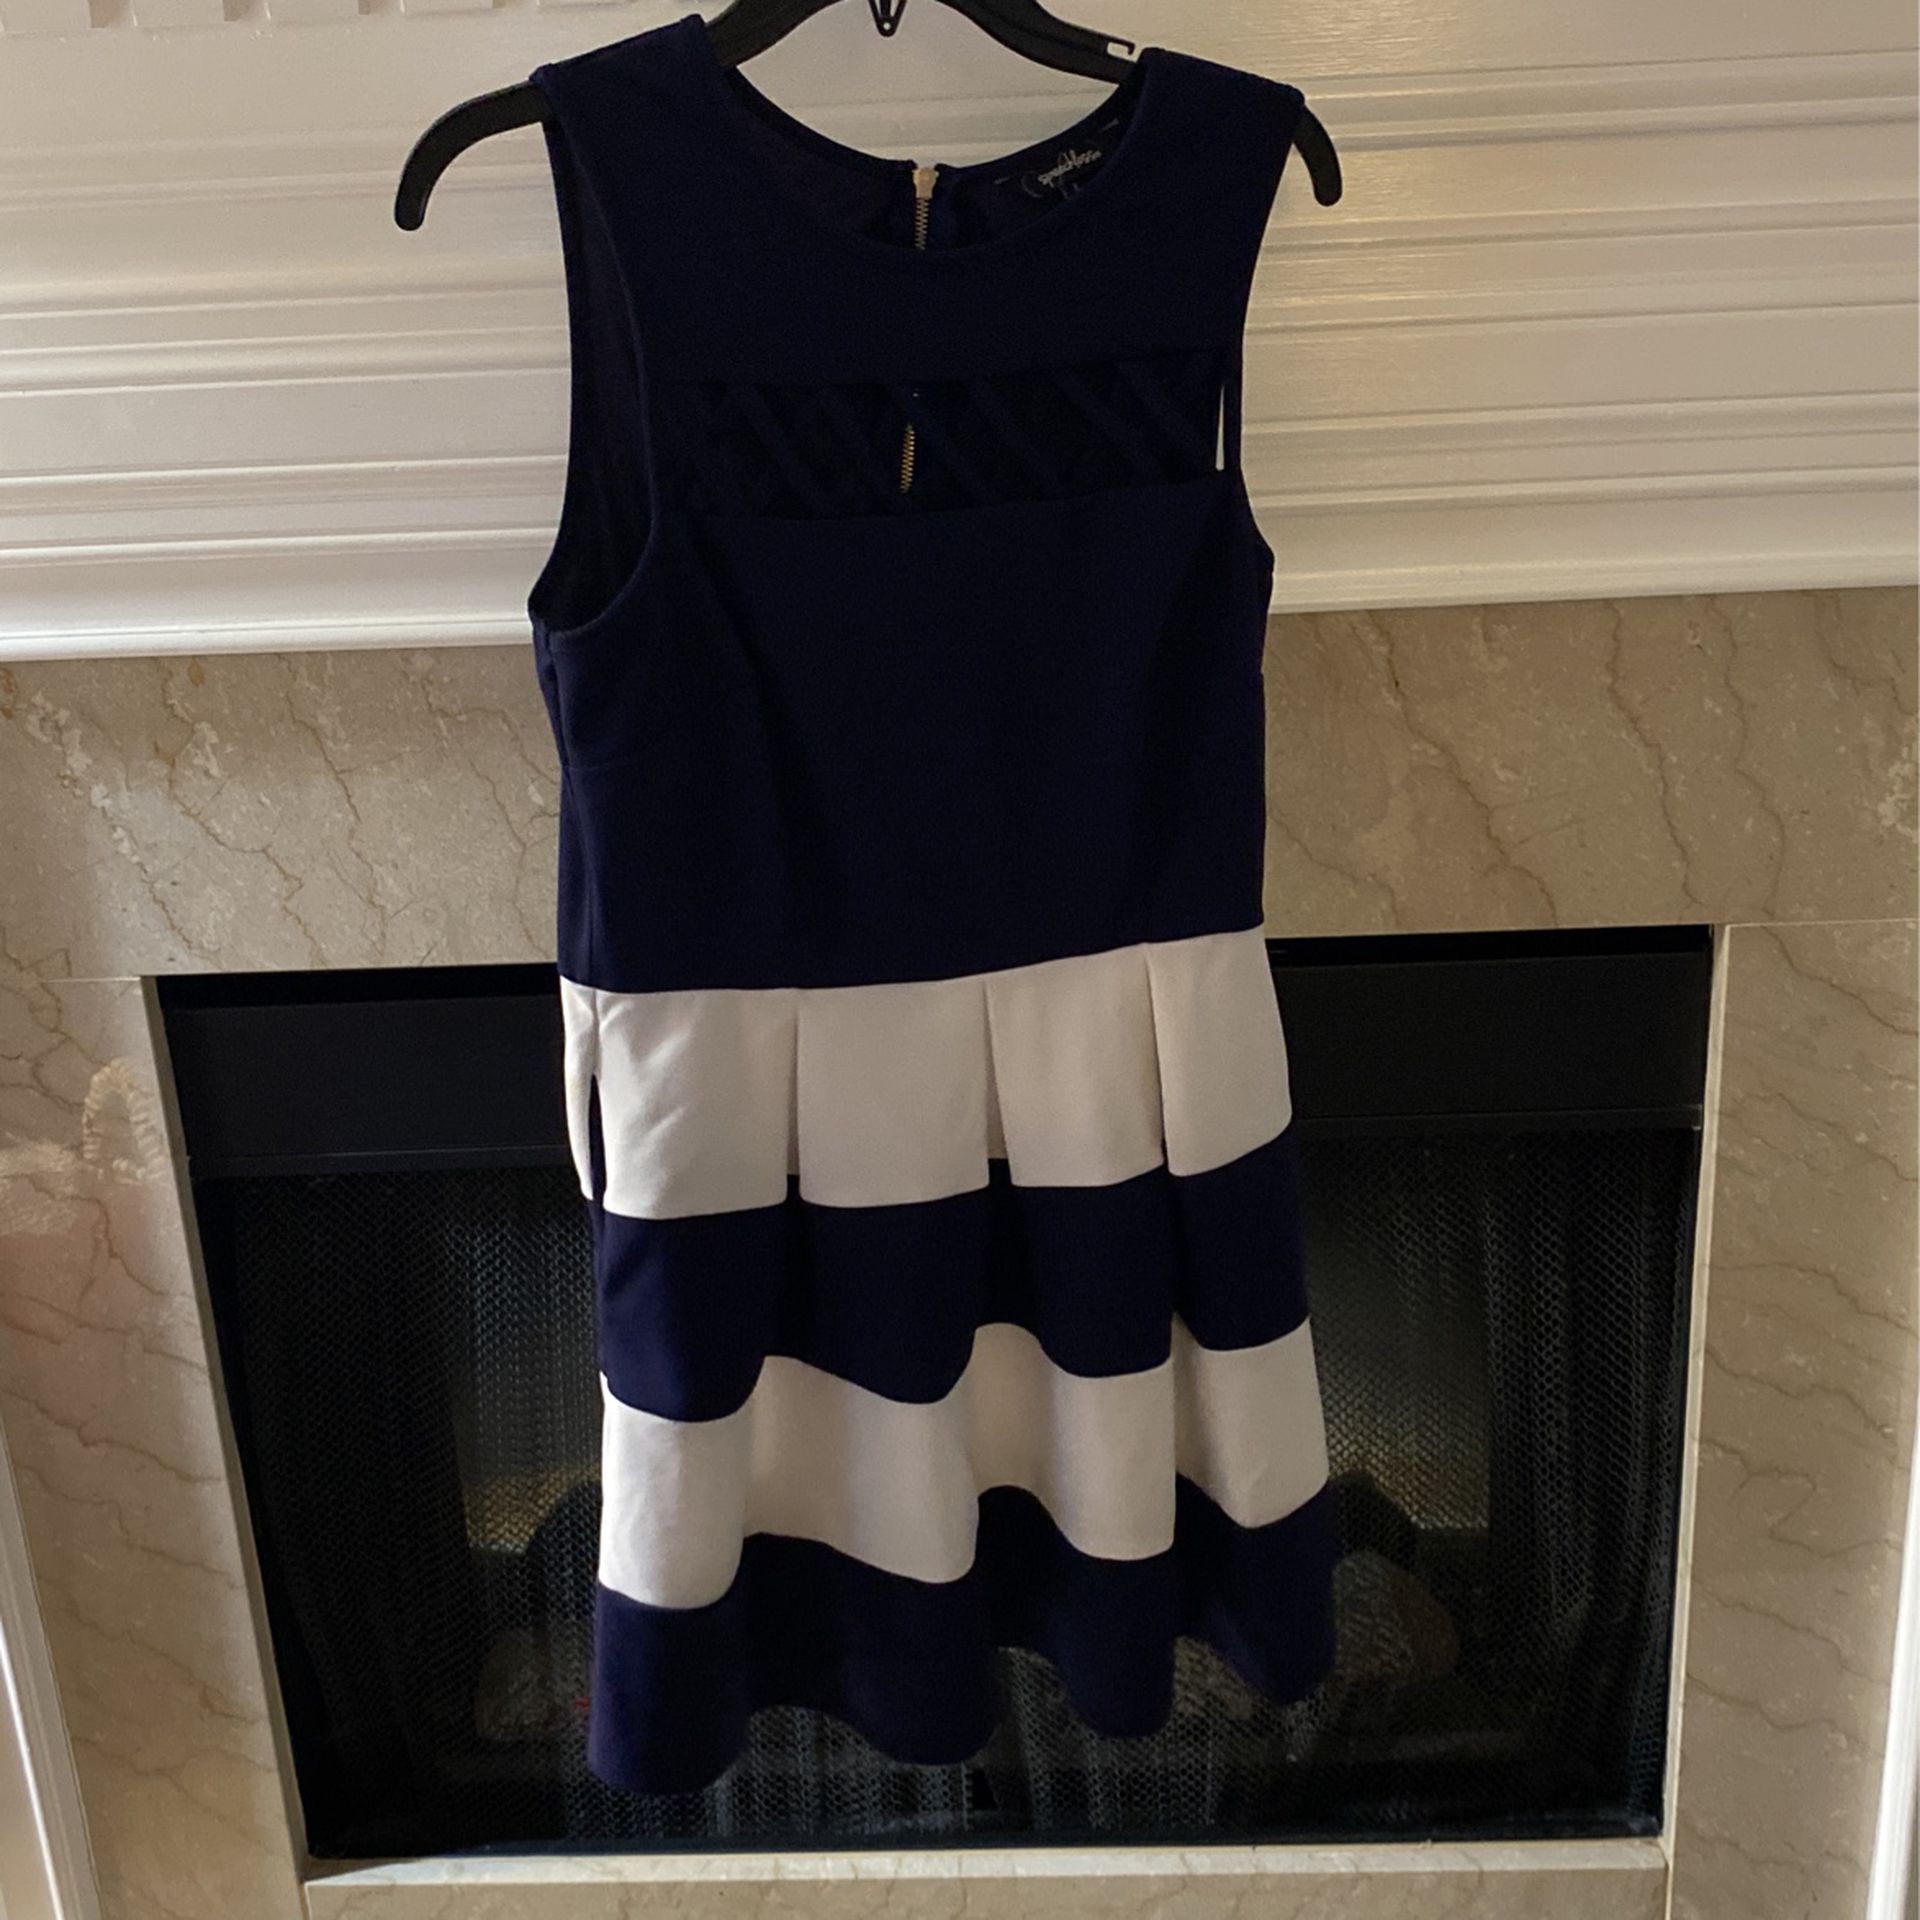 Navy Blue And White Dress-criss cross Neck Line-large